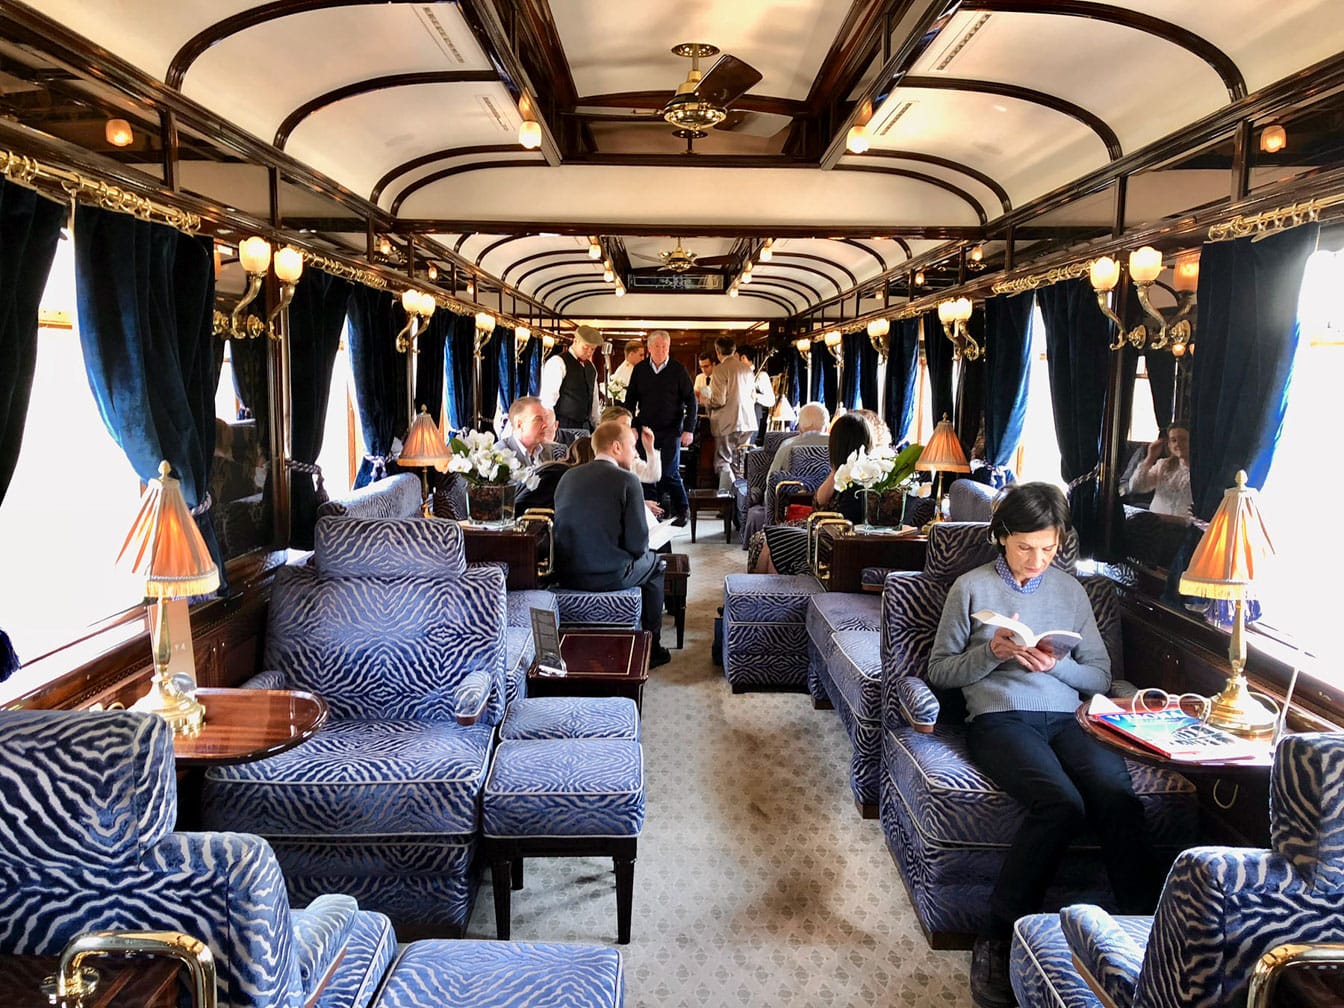 Guests reading in the Venice Simplon-Orient-Express (VSOE) train